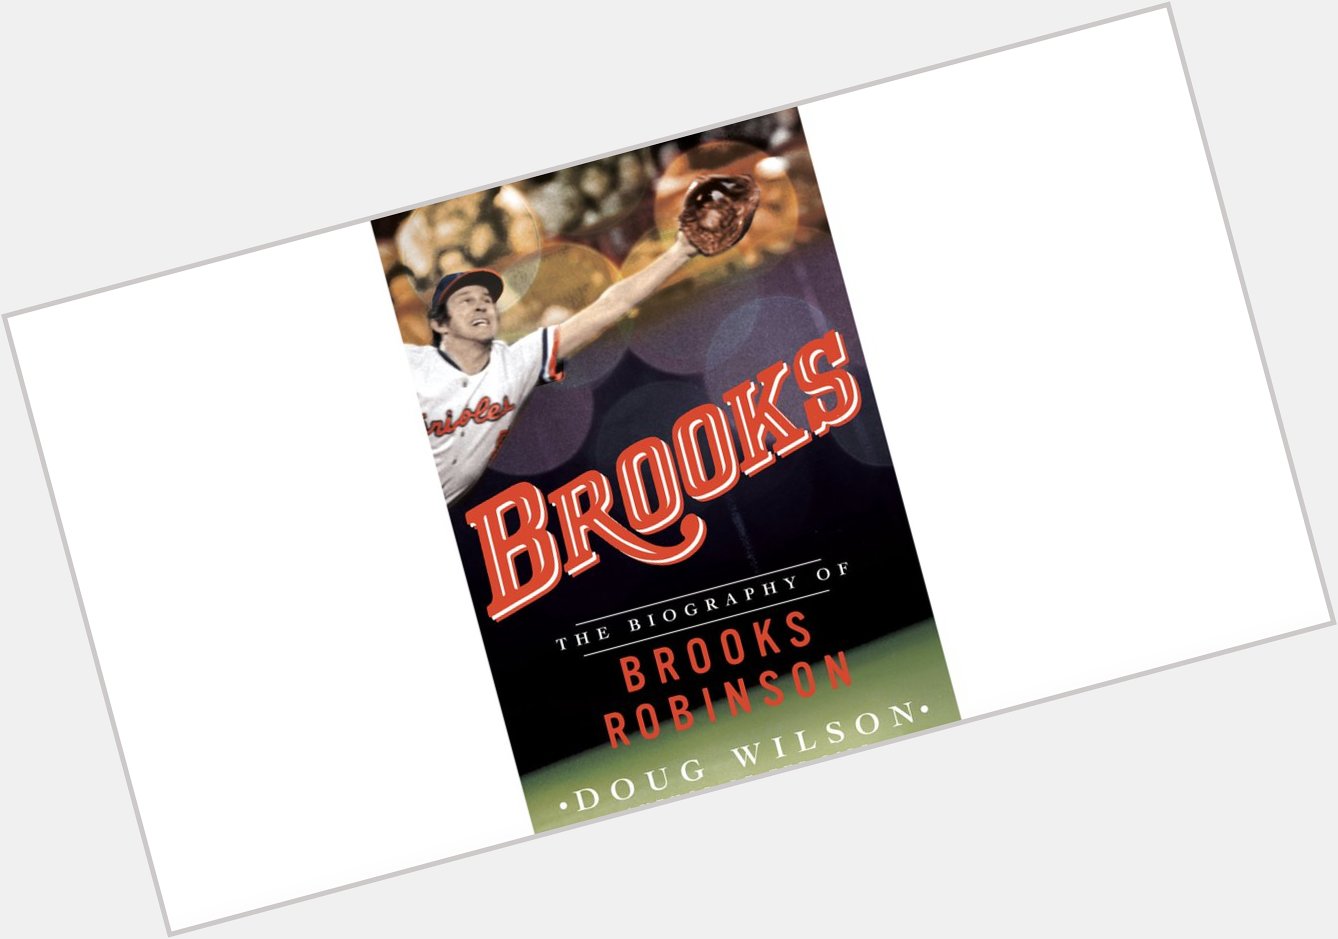 Happy 80th birthday to the great Brooks Robinson, the subject of Episode 7. Listen:   